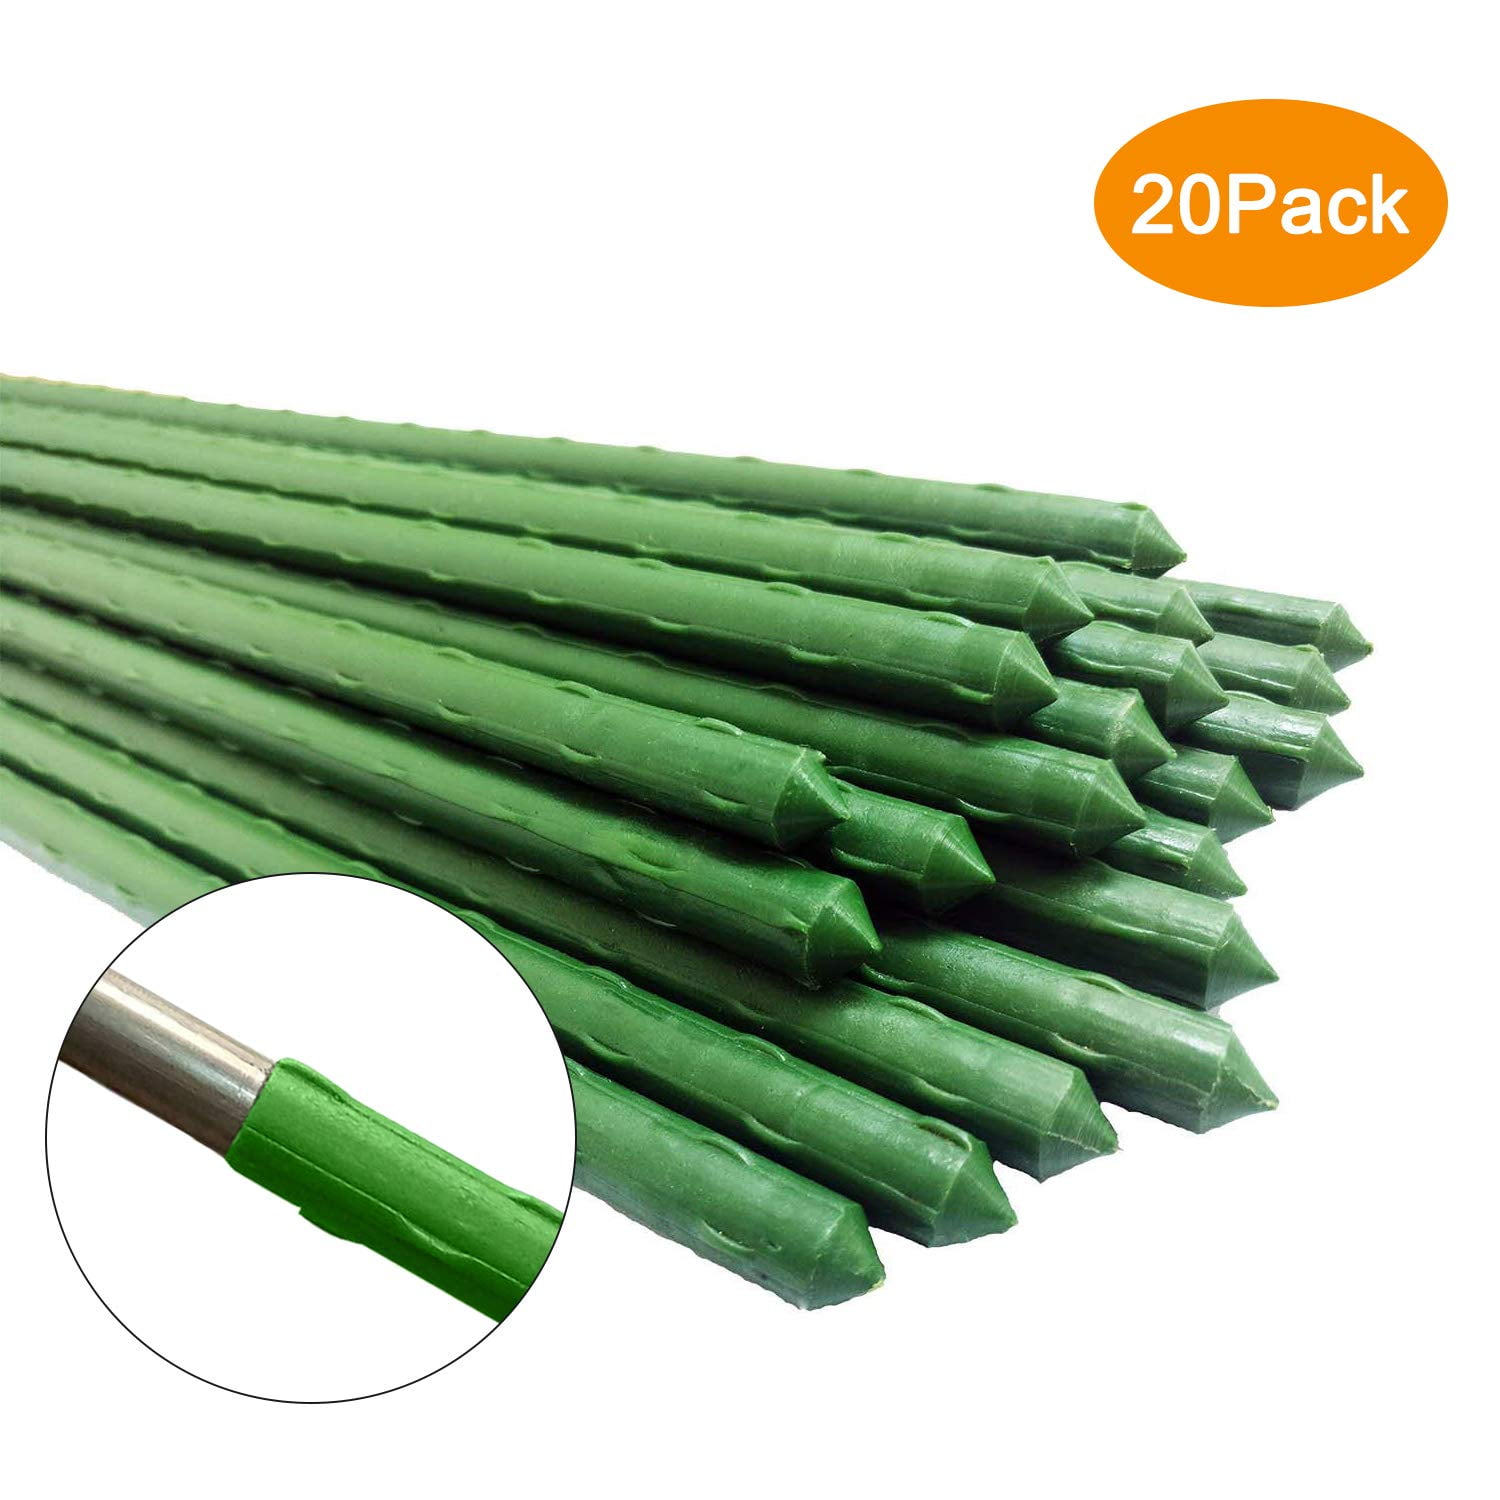 4ft 0.63in-Dia 20PCS+30Accessories F.O.T Sturdy Metal Garden Stakes 24Pcs Gardening Support 1.97 Ft Plastic Coated Plant Sticks 